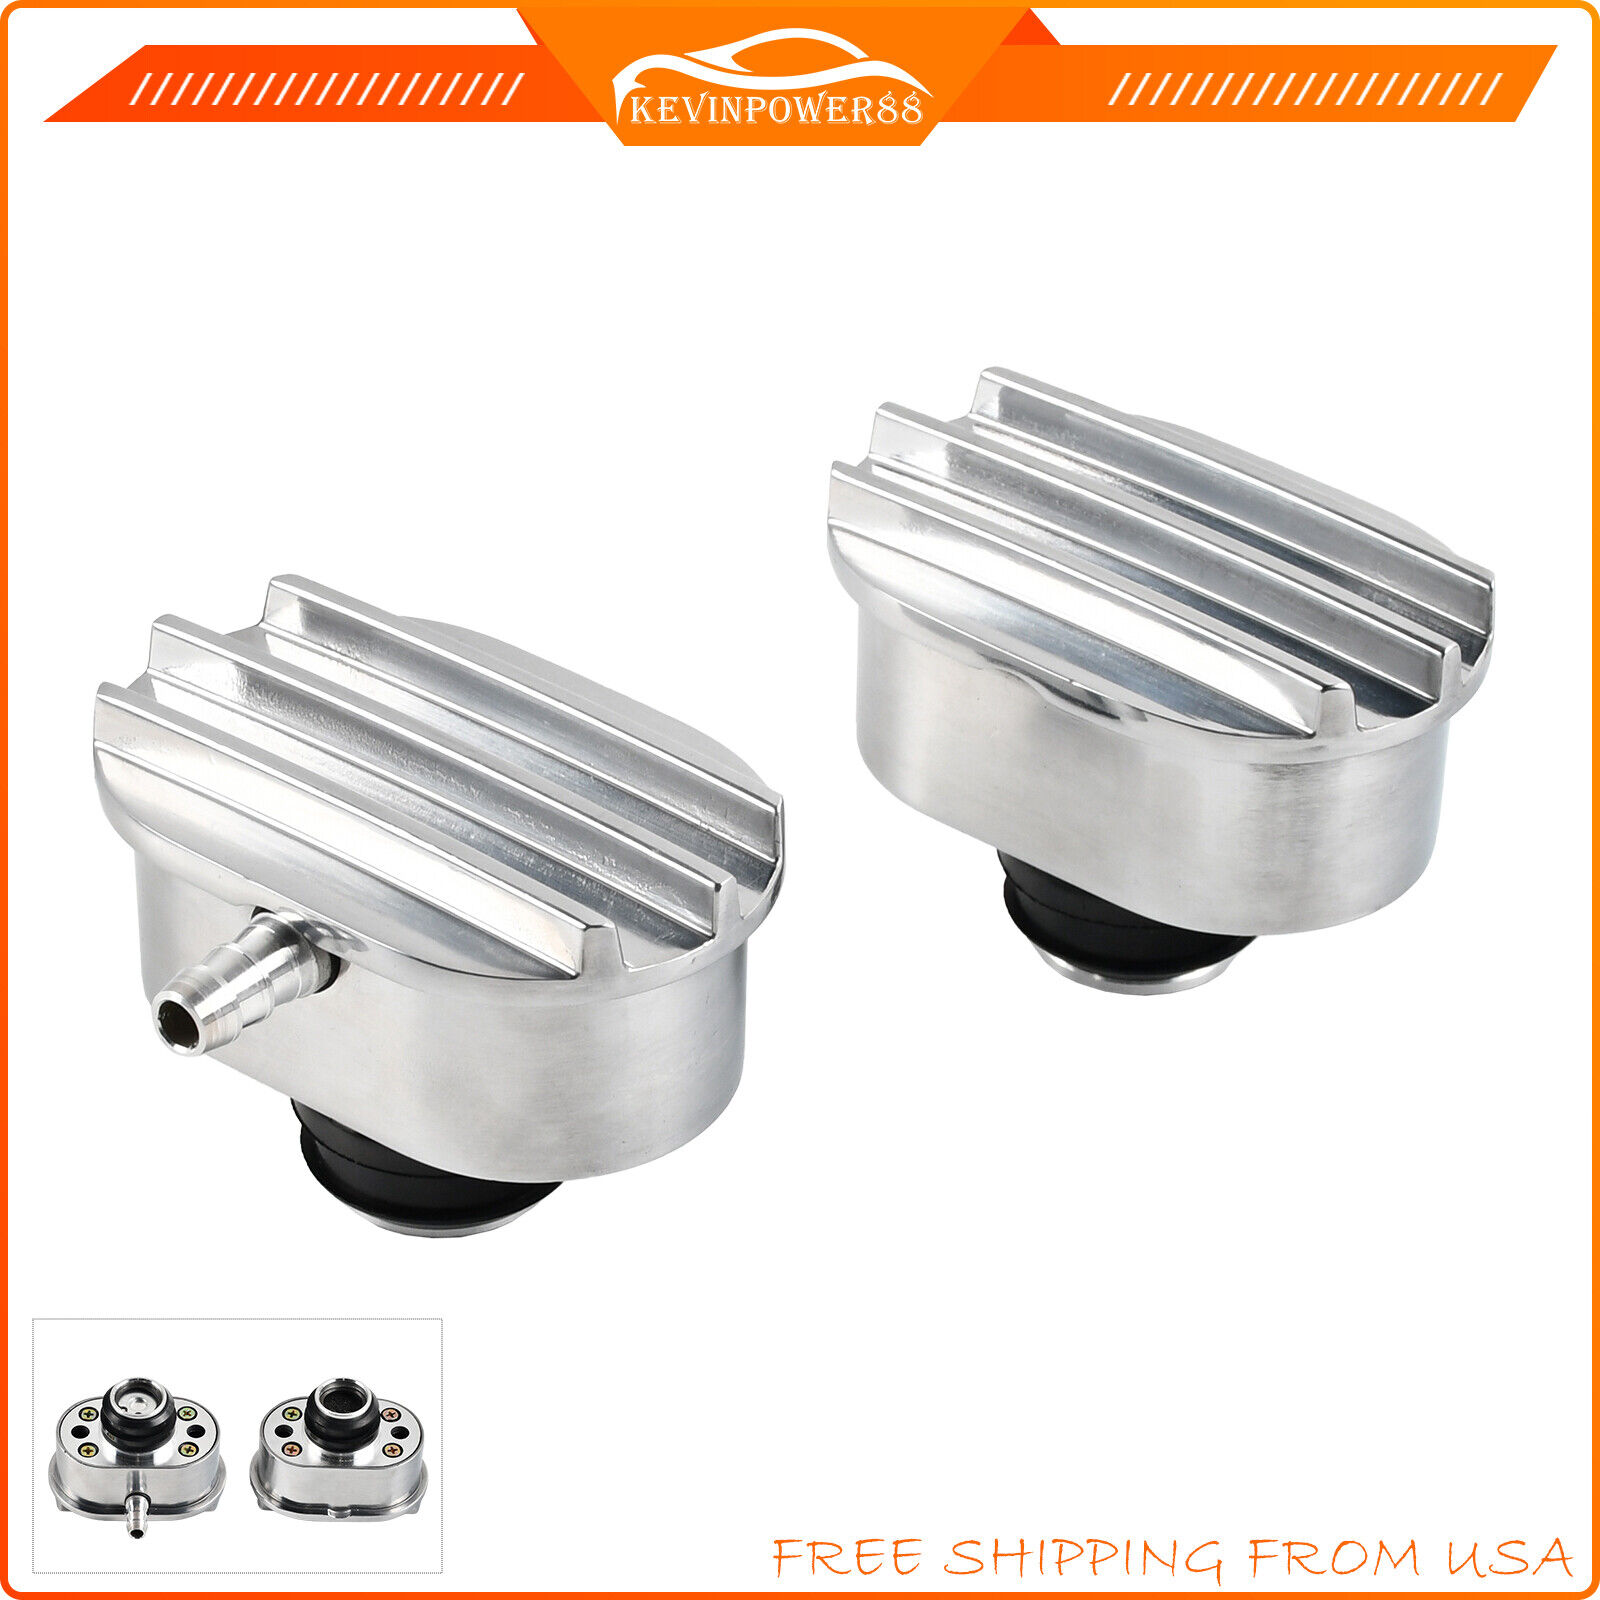 Polished Aluminum Finned Oval Air PCV Breather Combo Valve Cover Set of 2